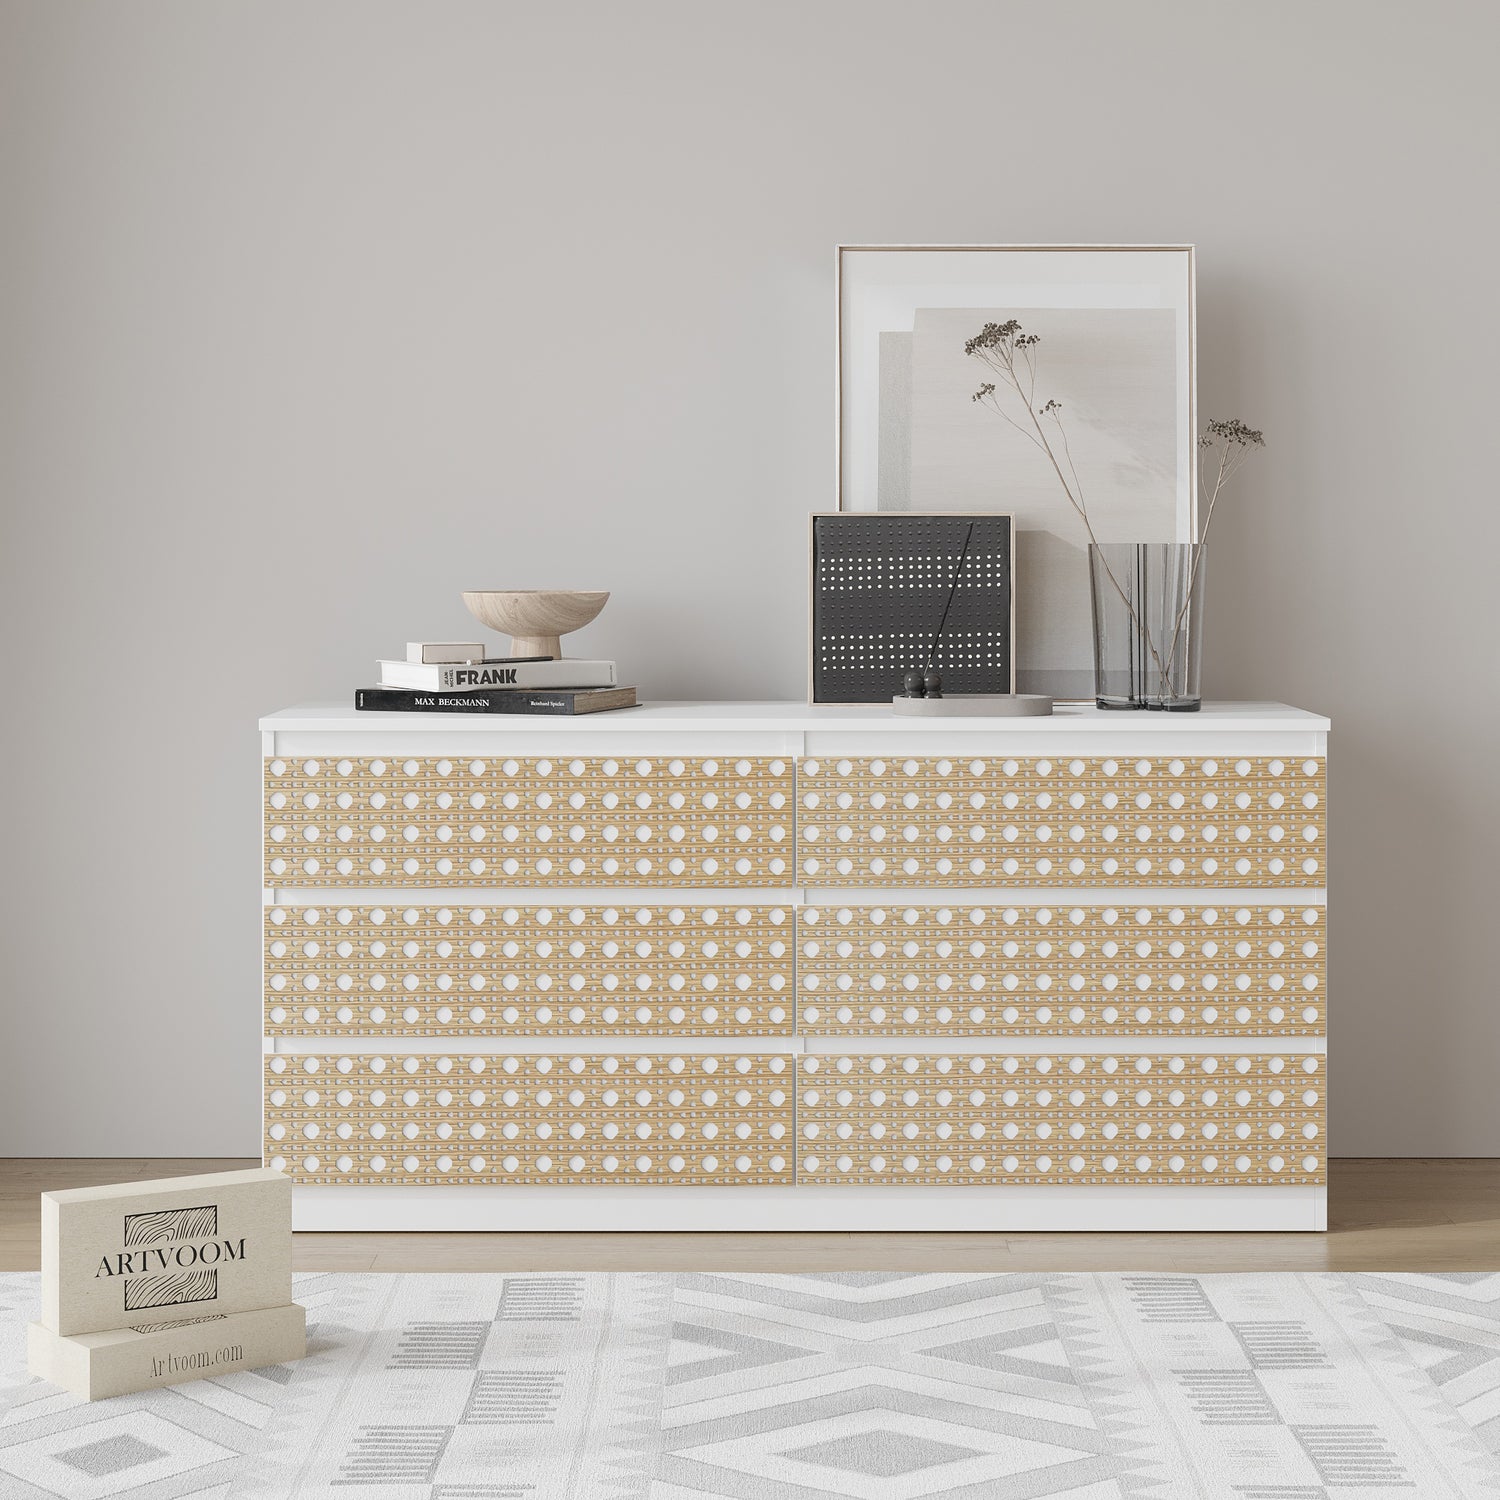 Wooden dresser overlays with rattan pattern for IKEA® malm furniture